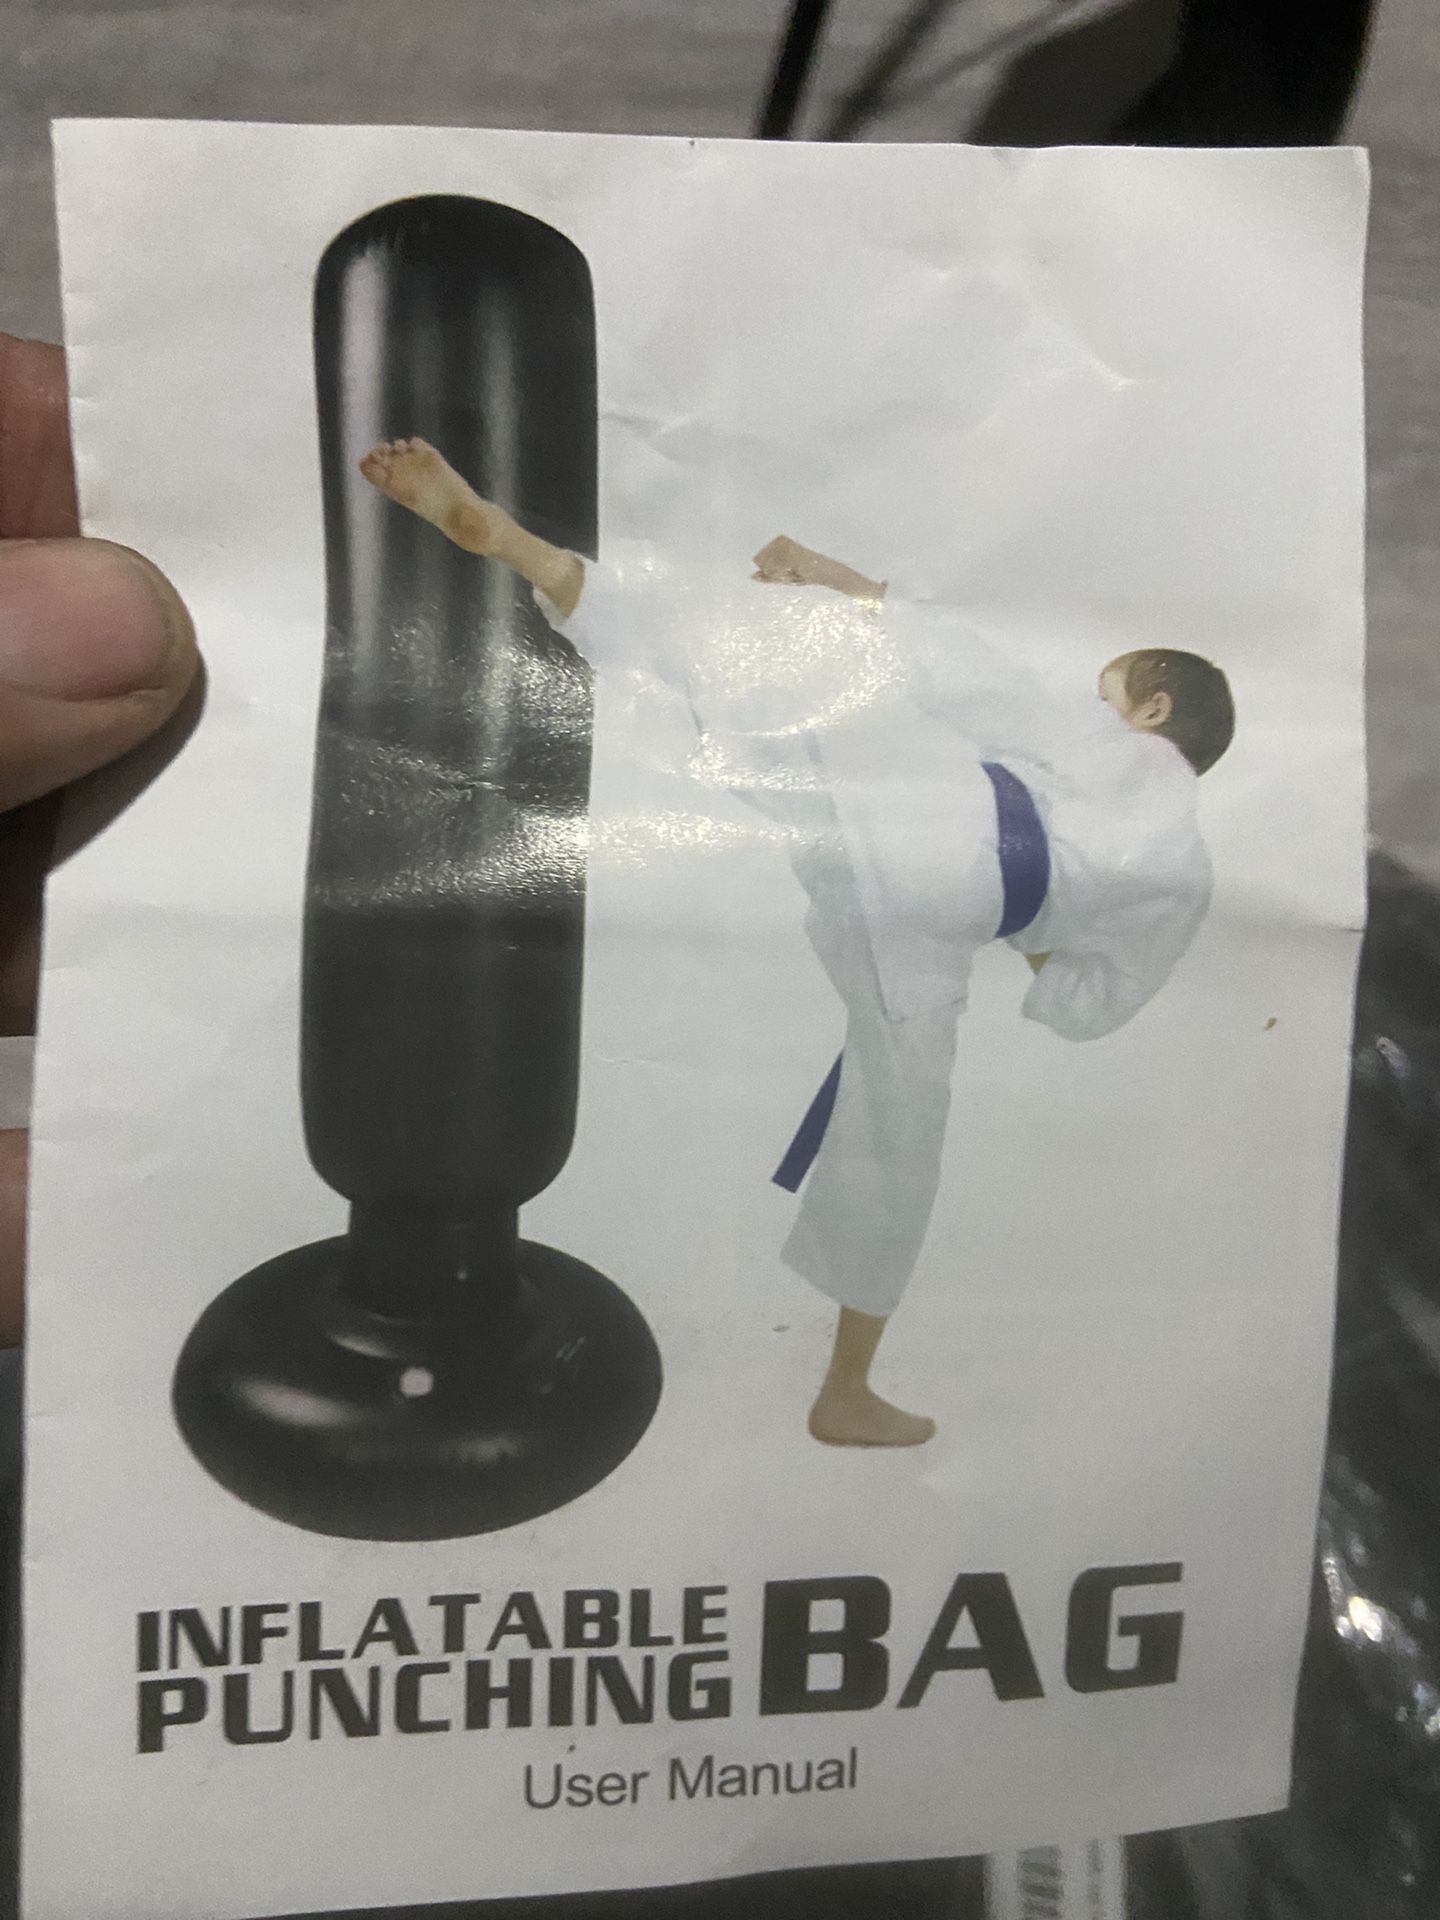 Inflatable Puching Bag